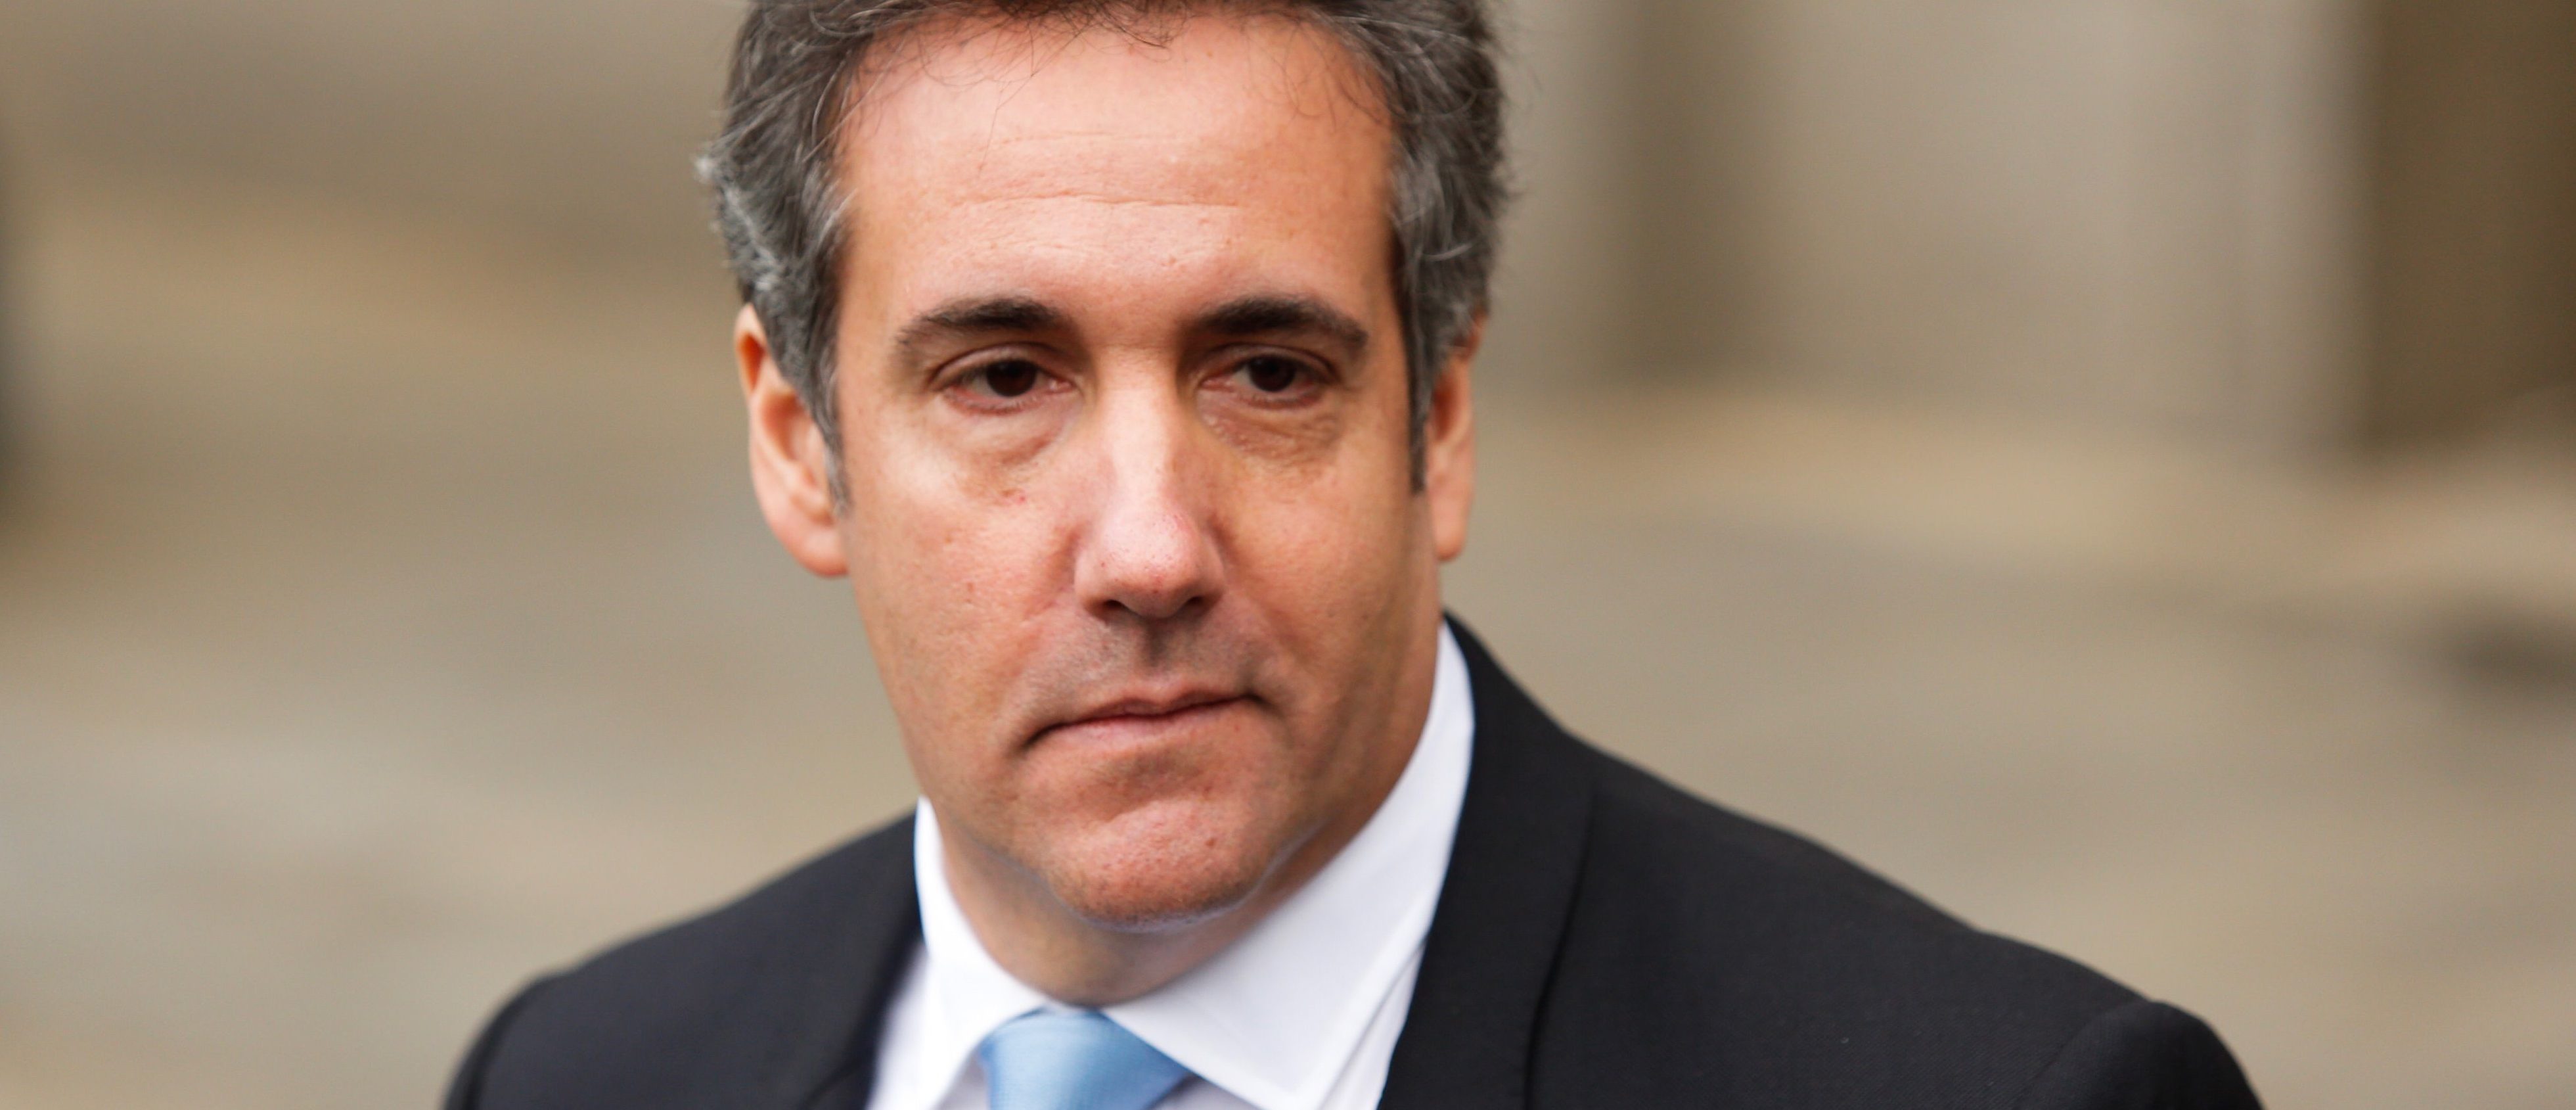 President Trumps lawyer Michael Cohen exits the US Federal Court on April 16, 2018, in Lower Manhattan, New York. President Donald Trump's personal lawyer Michael Cohen has been under criminal investigation for months over his business dealings, and FBI agents last week raided his home, hotel room, office, a safety deposit box and seized two cellphones. Some of the documents reportedly relate to payments to porn star Stormy Daniels, who claims a one-night stand with Trump a decade ago, and ex Playboy model Karen McDougal who also claims an affair. / AFP PHOTO / EDUARDO MUNOZ ALVAREZ (Photo credit should read EDUARDO MUNOZ ALVAREZ/AFP/Getty Images)